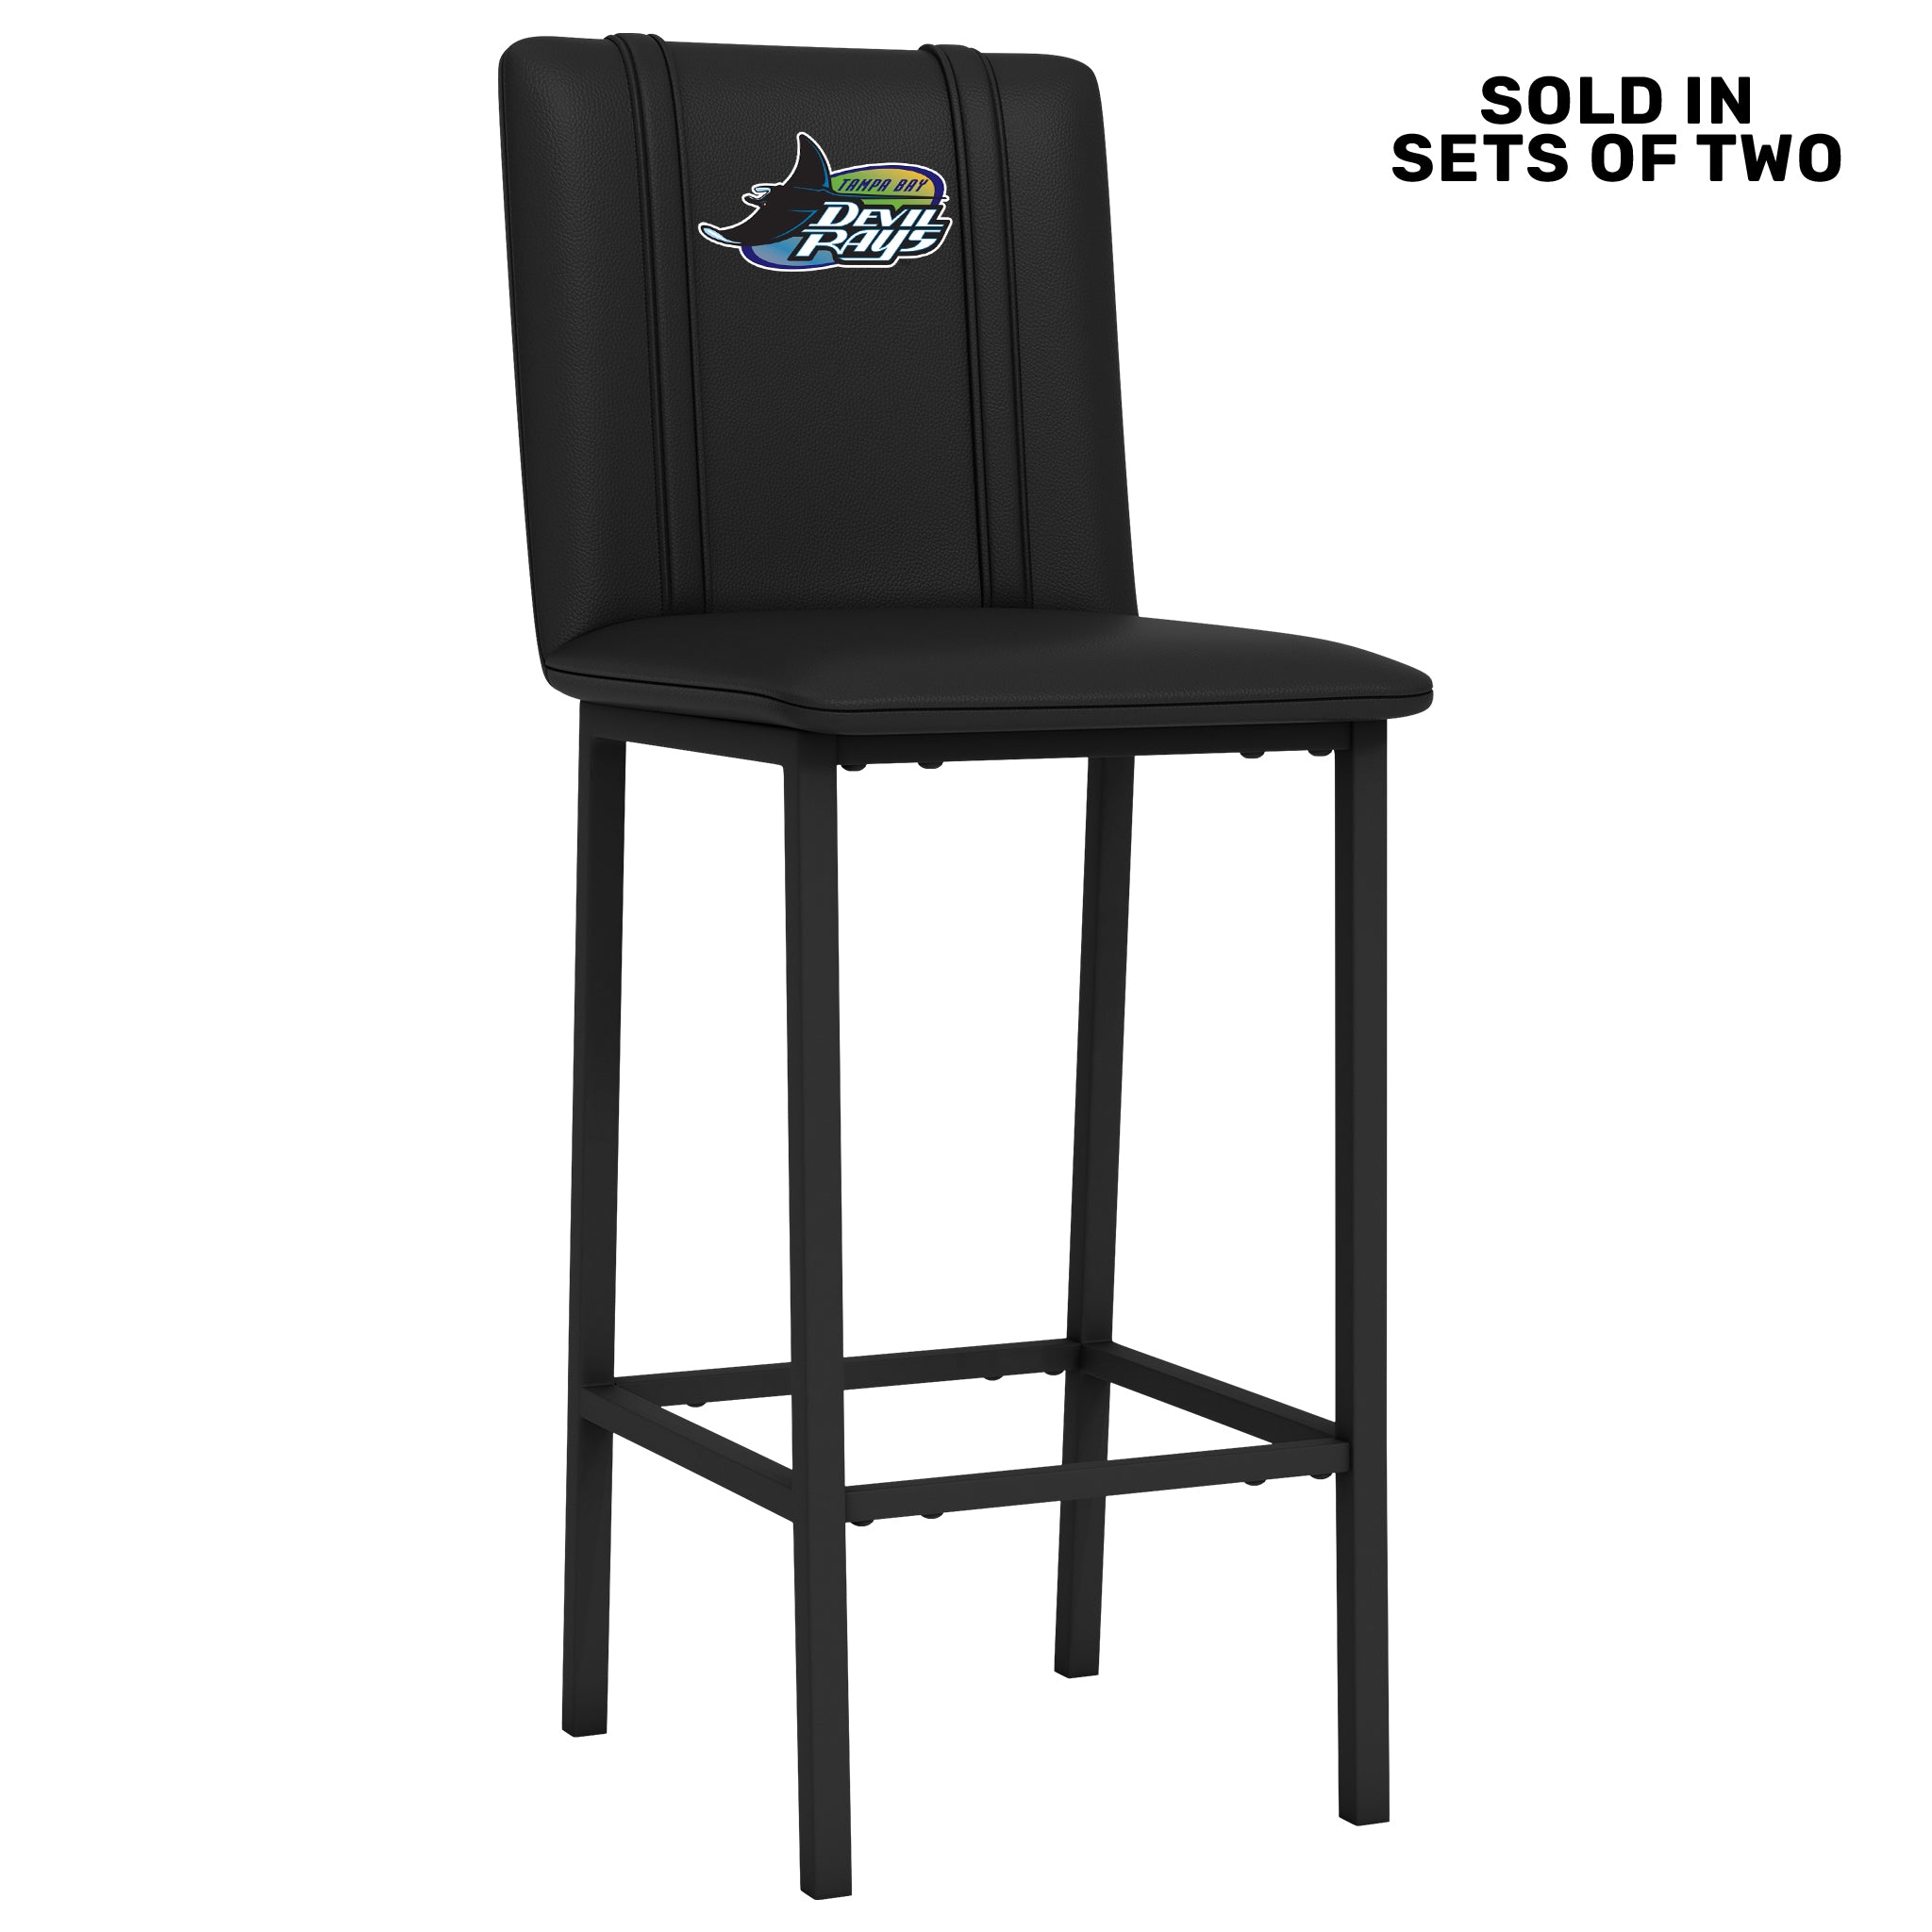 Bar Stool 500 with Tampa Bay Rays Cooperstown Primary Set of 2